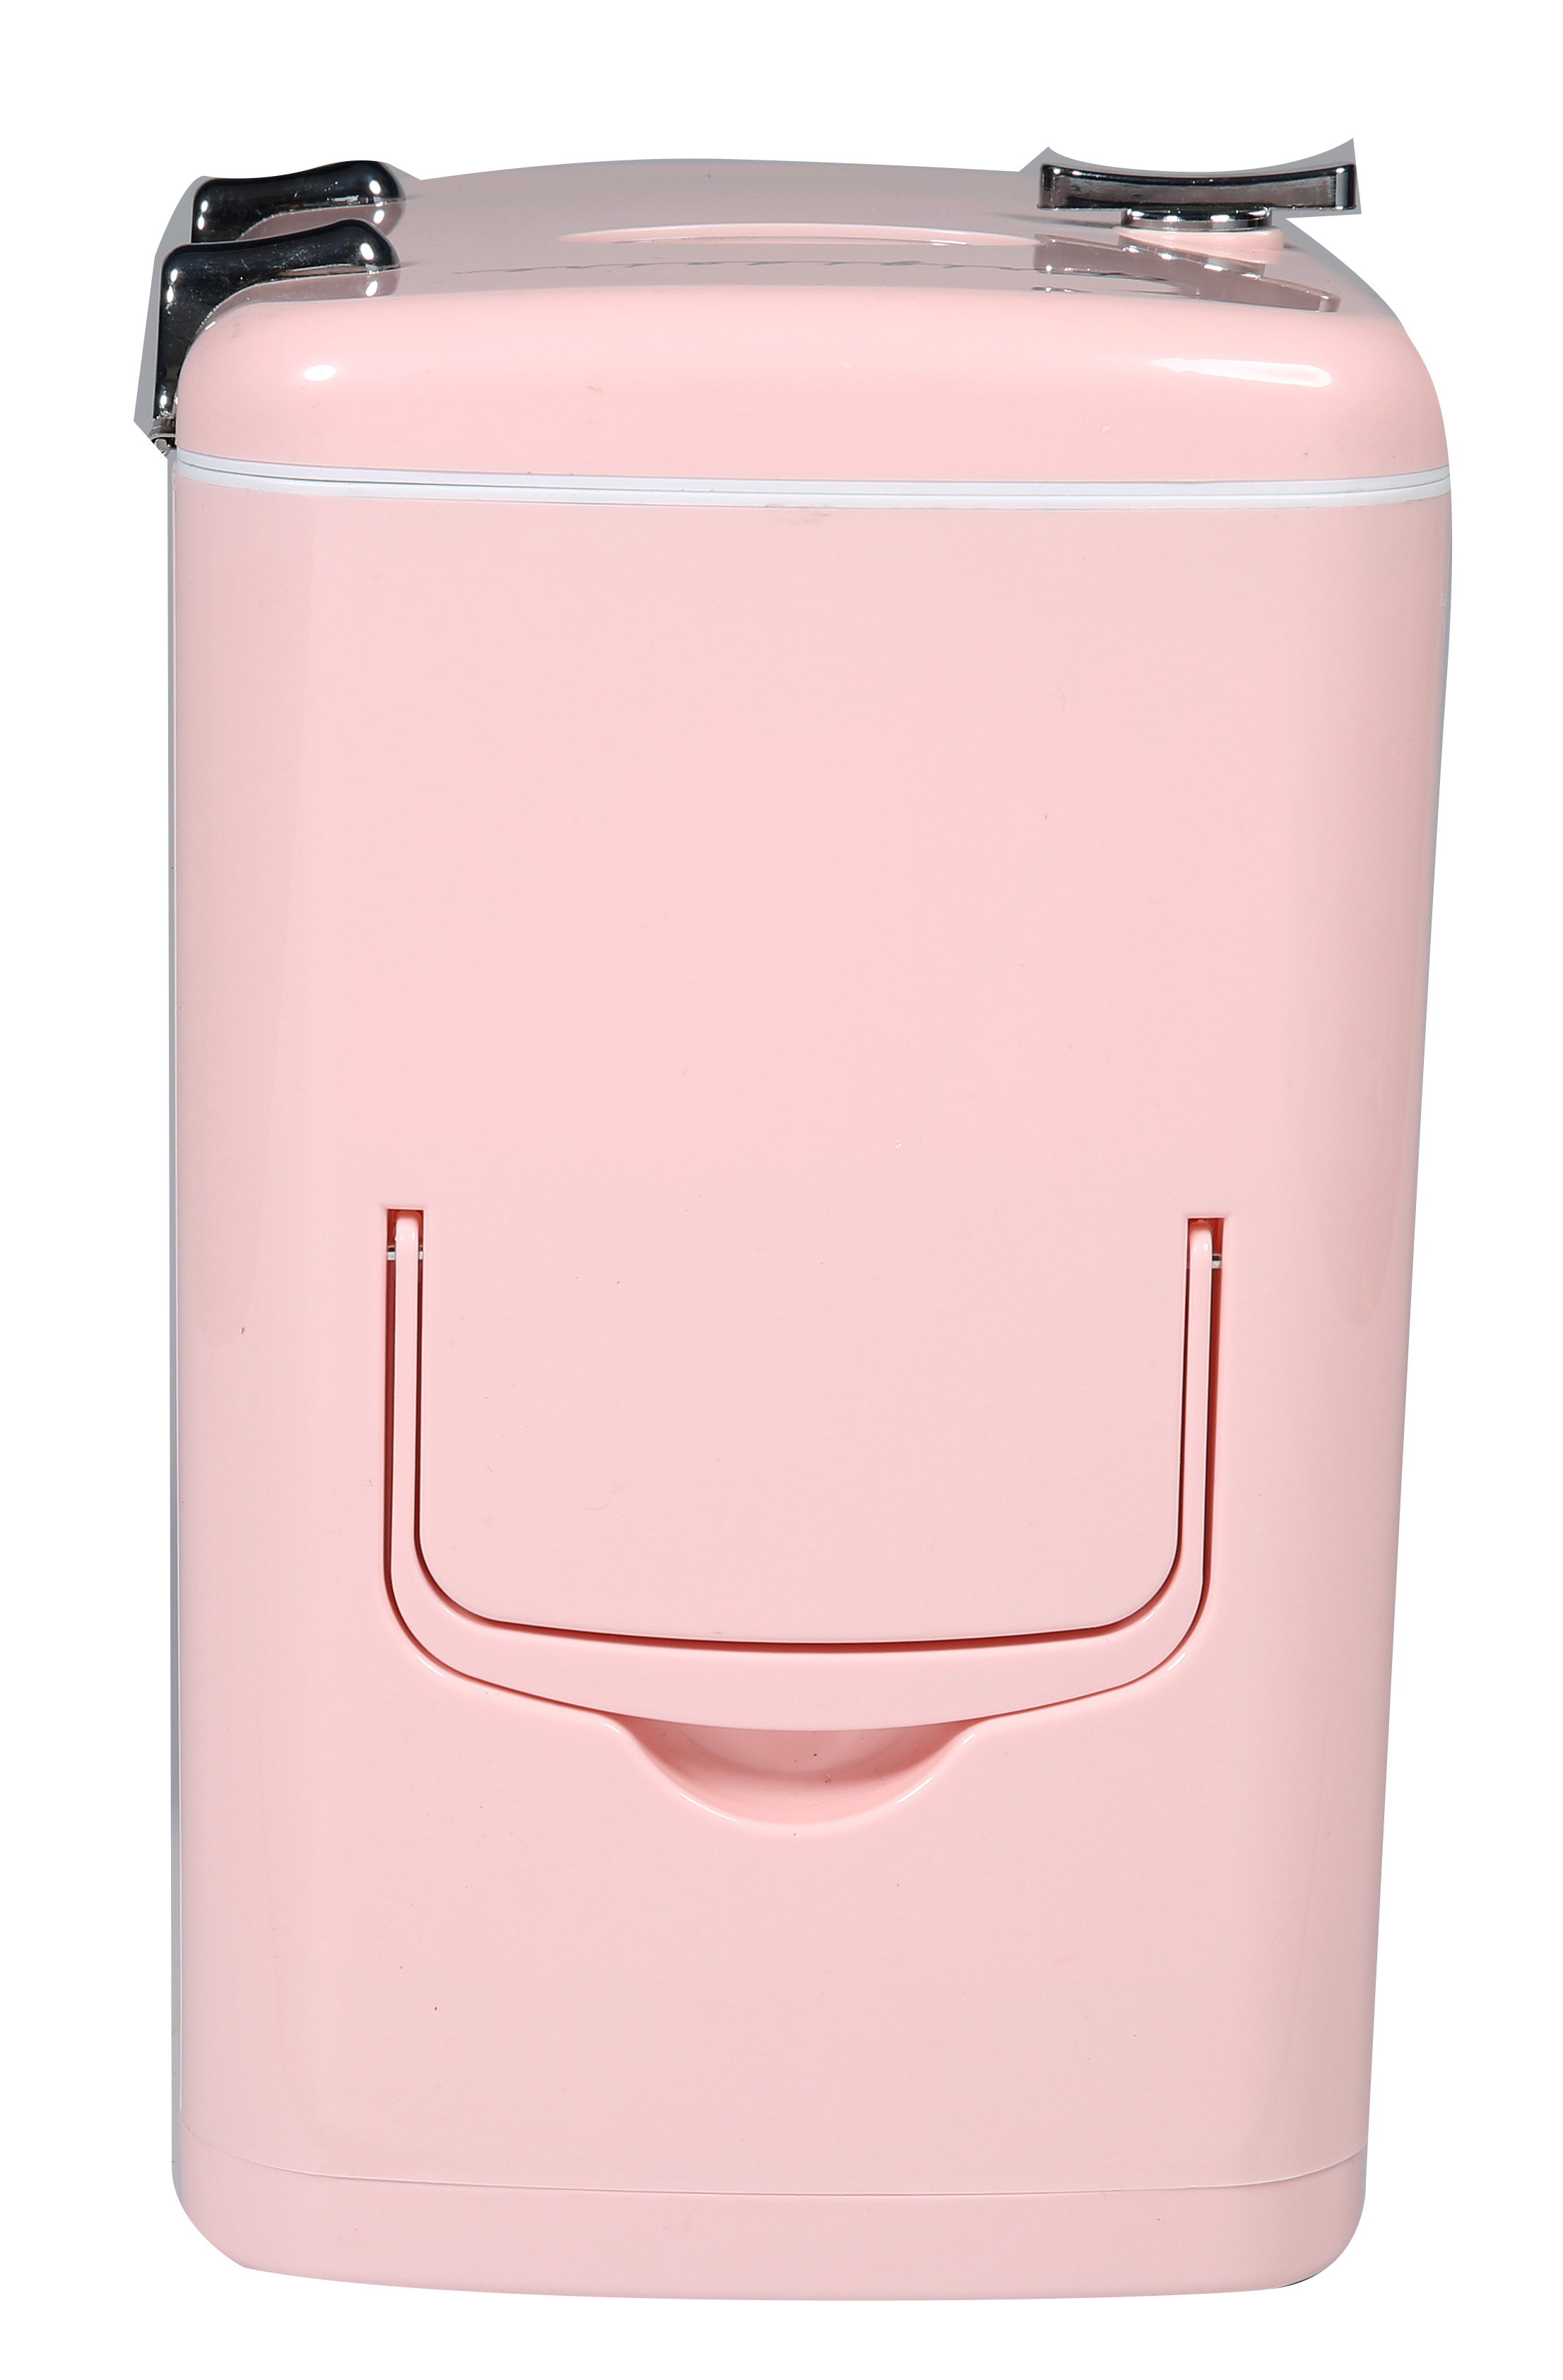 Frigidaire Portable Retro Extra Large 9-Can Capacity Mini Cooler, EFMIS175, Pink - image 7 of 10